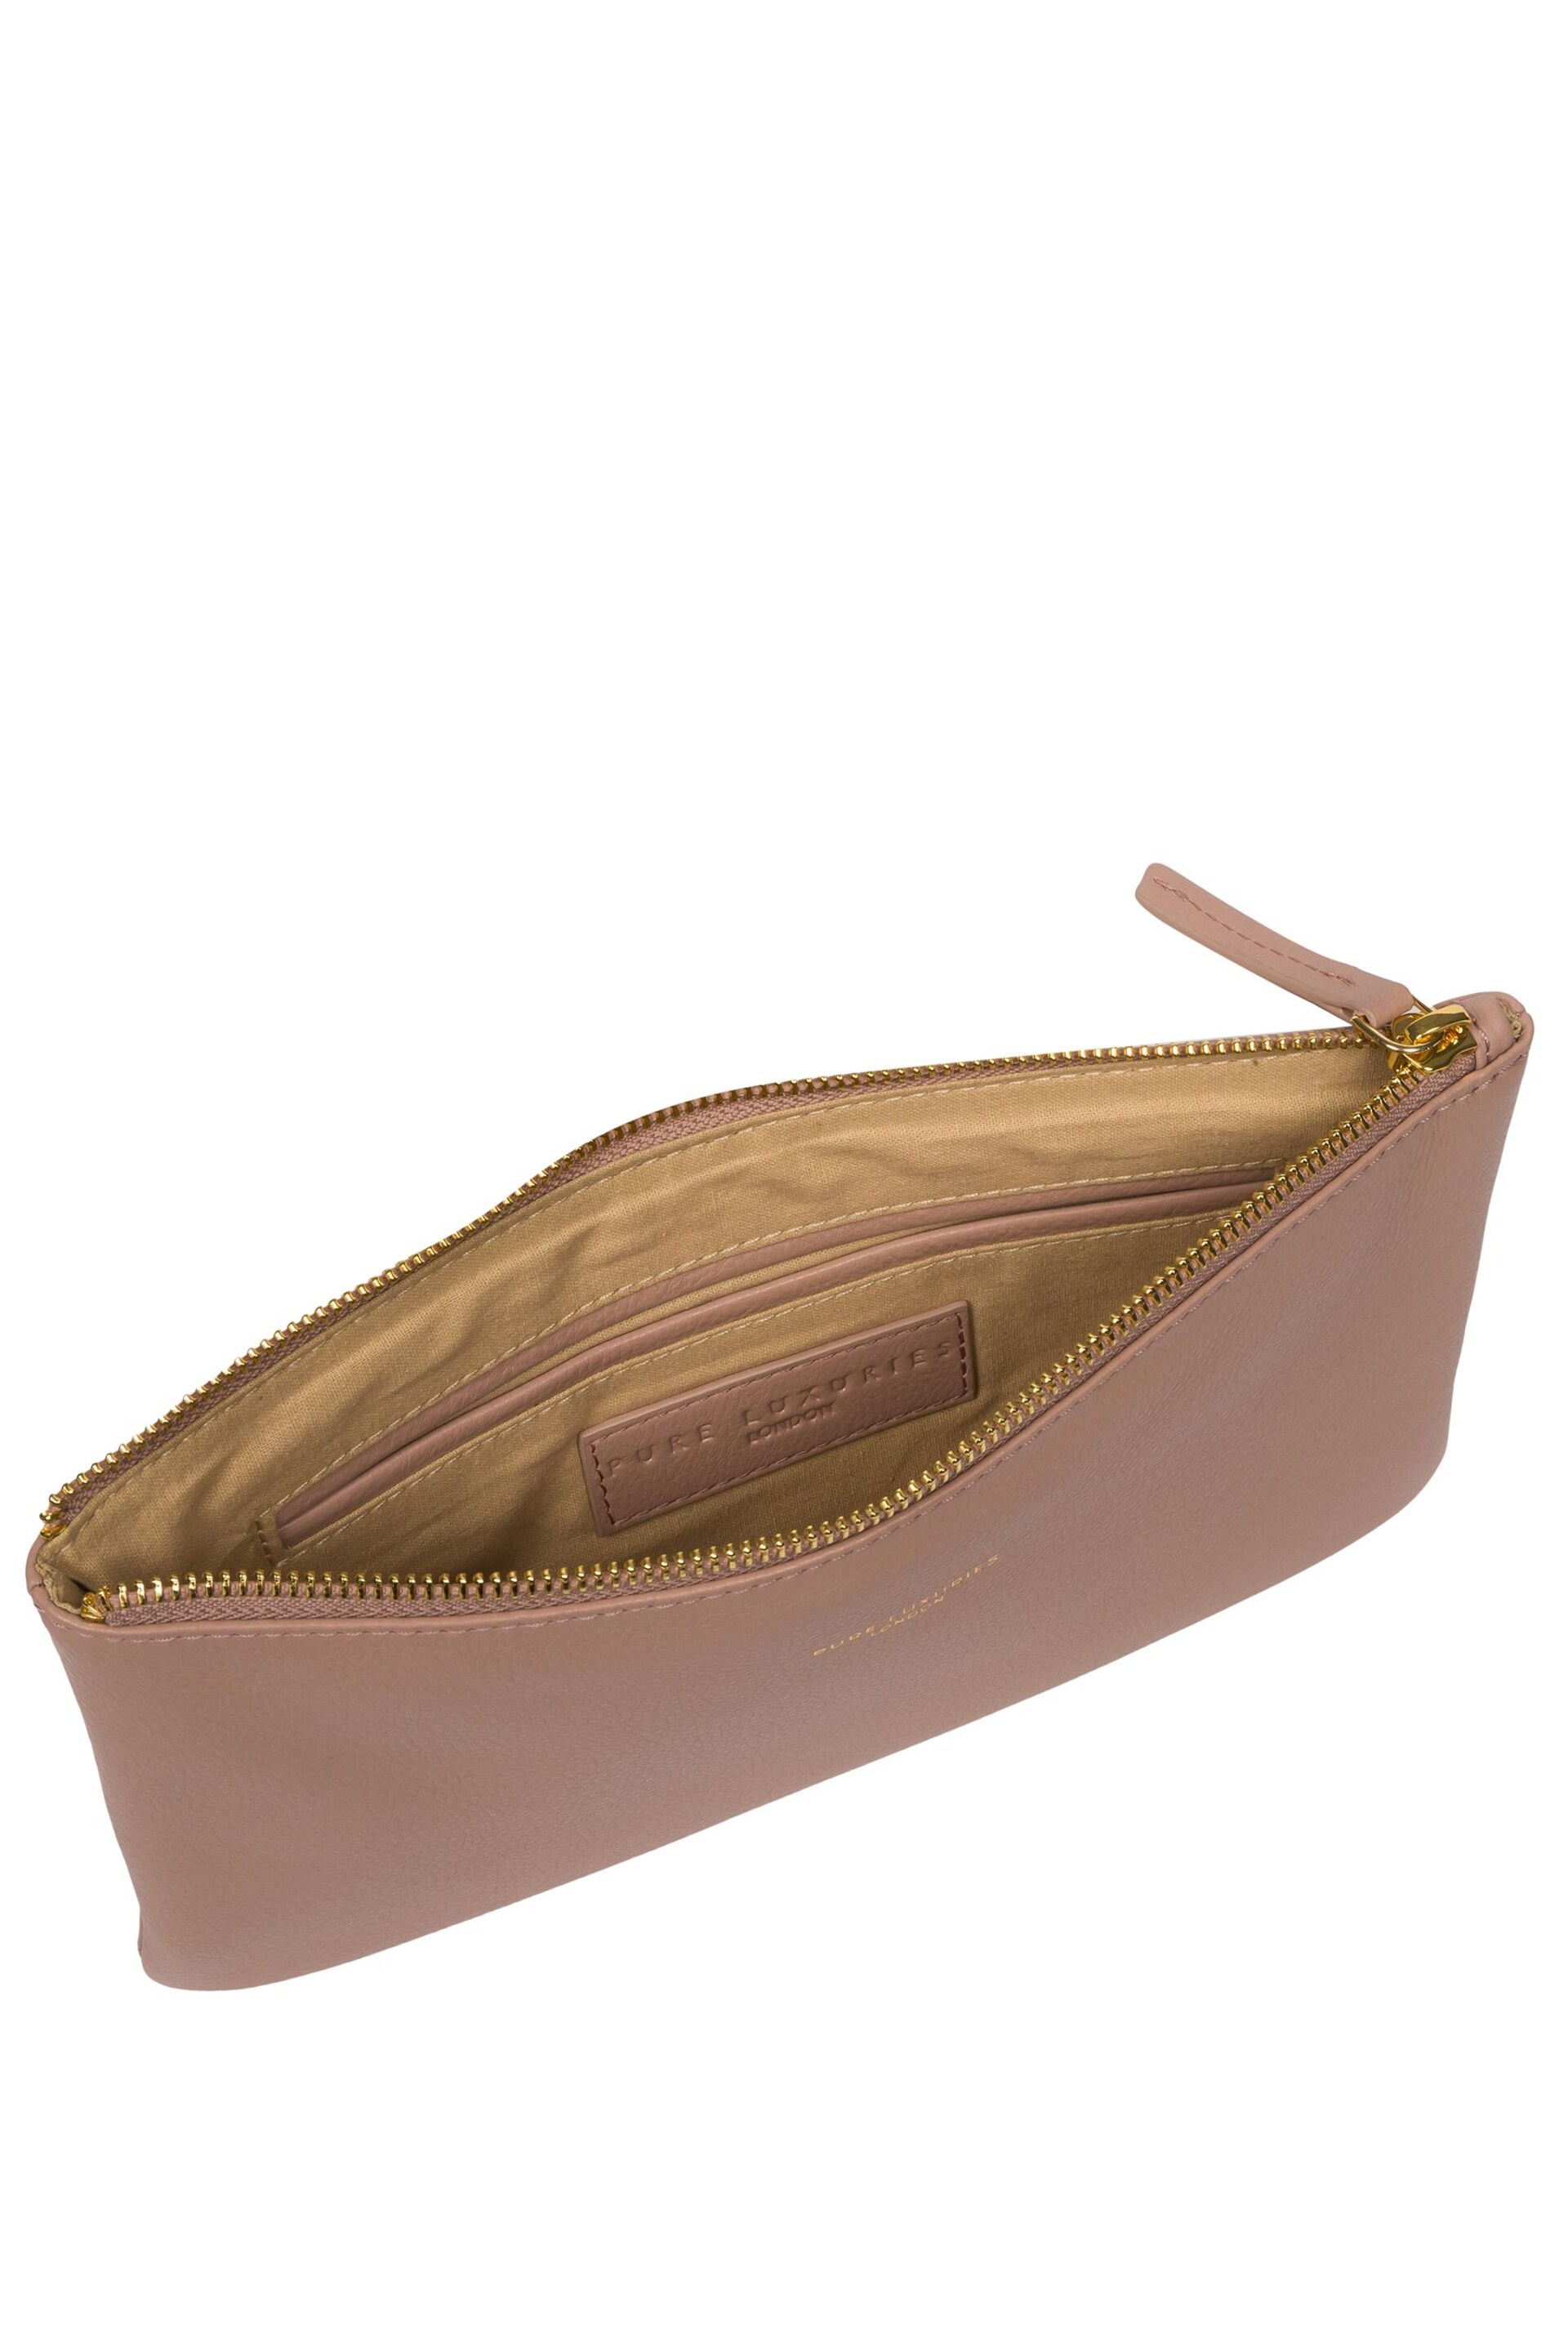 Pure Luxuries London Wilmslow Nappa Leather Clutch Bag - Image 4 of 6